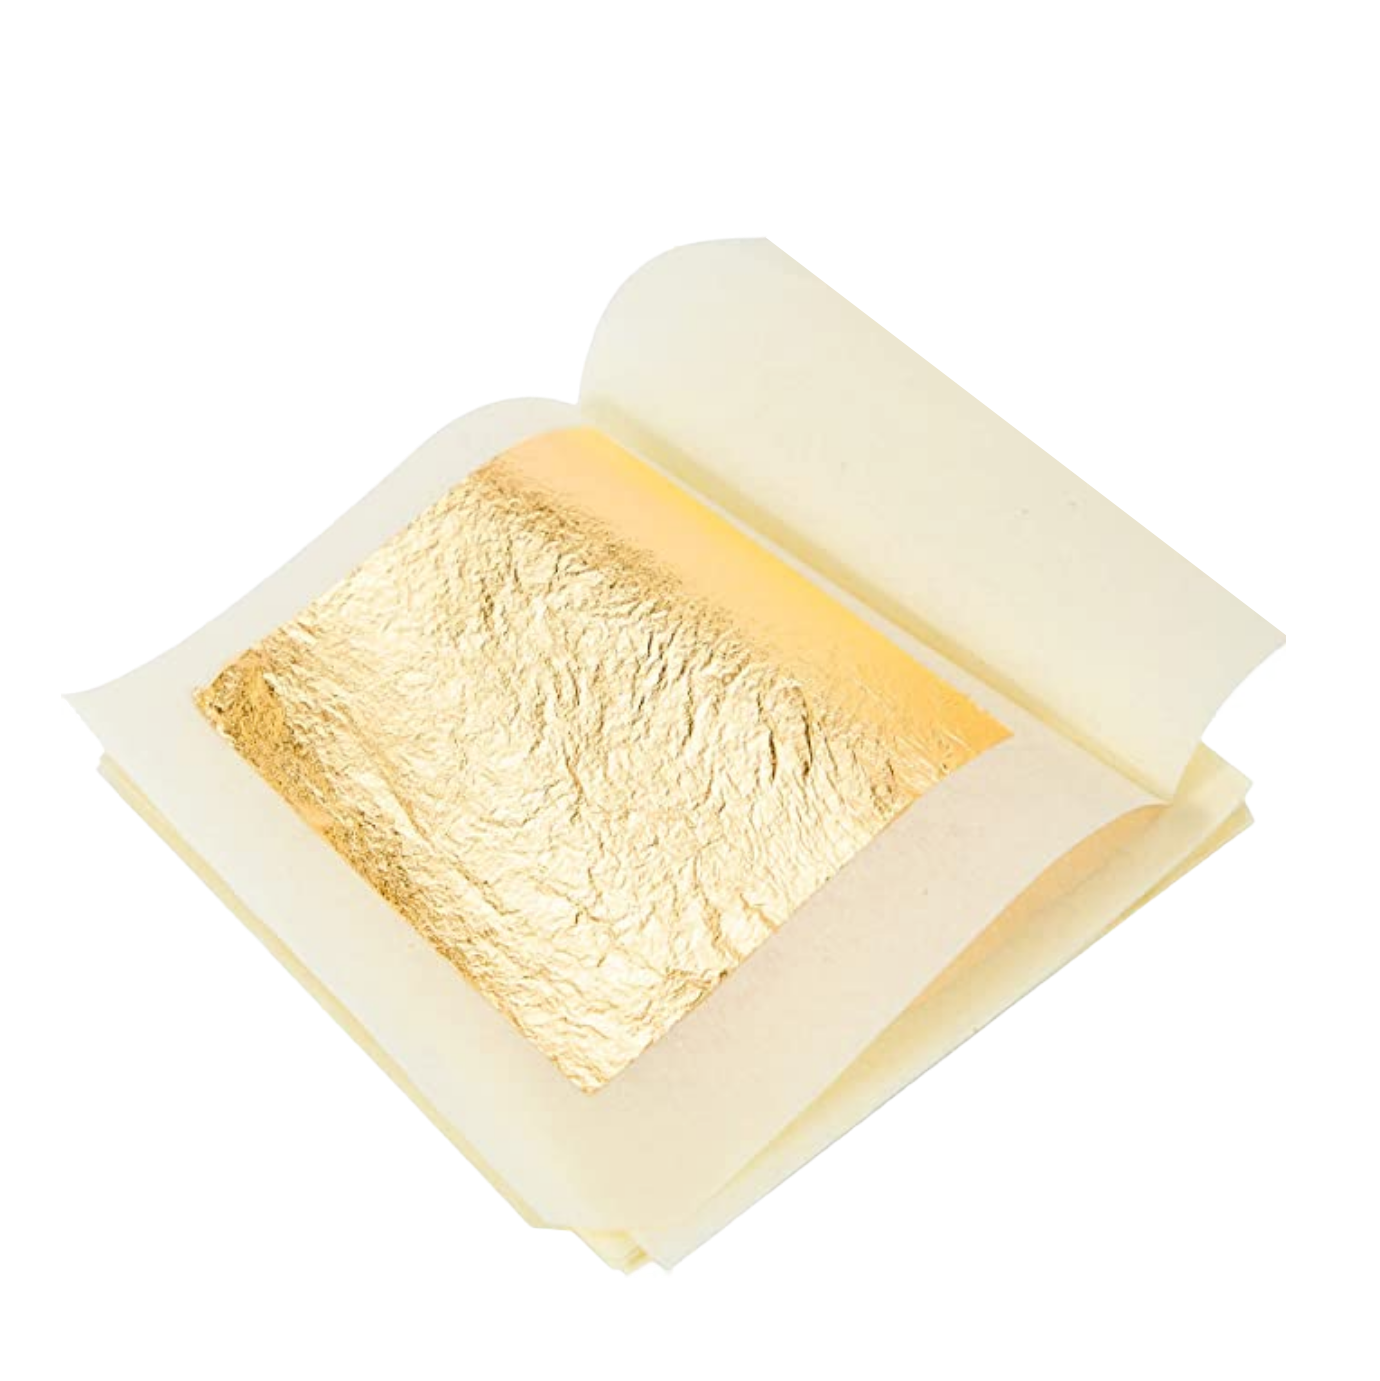 SIM GOLD LEAF 10 Feuilles d'or 35 mm X 38 mm Comestible Alimentaire - Feuille  d'or